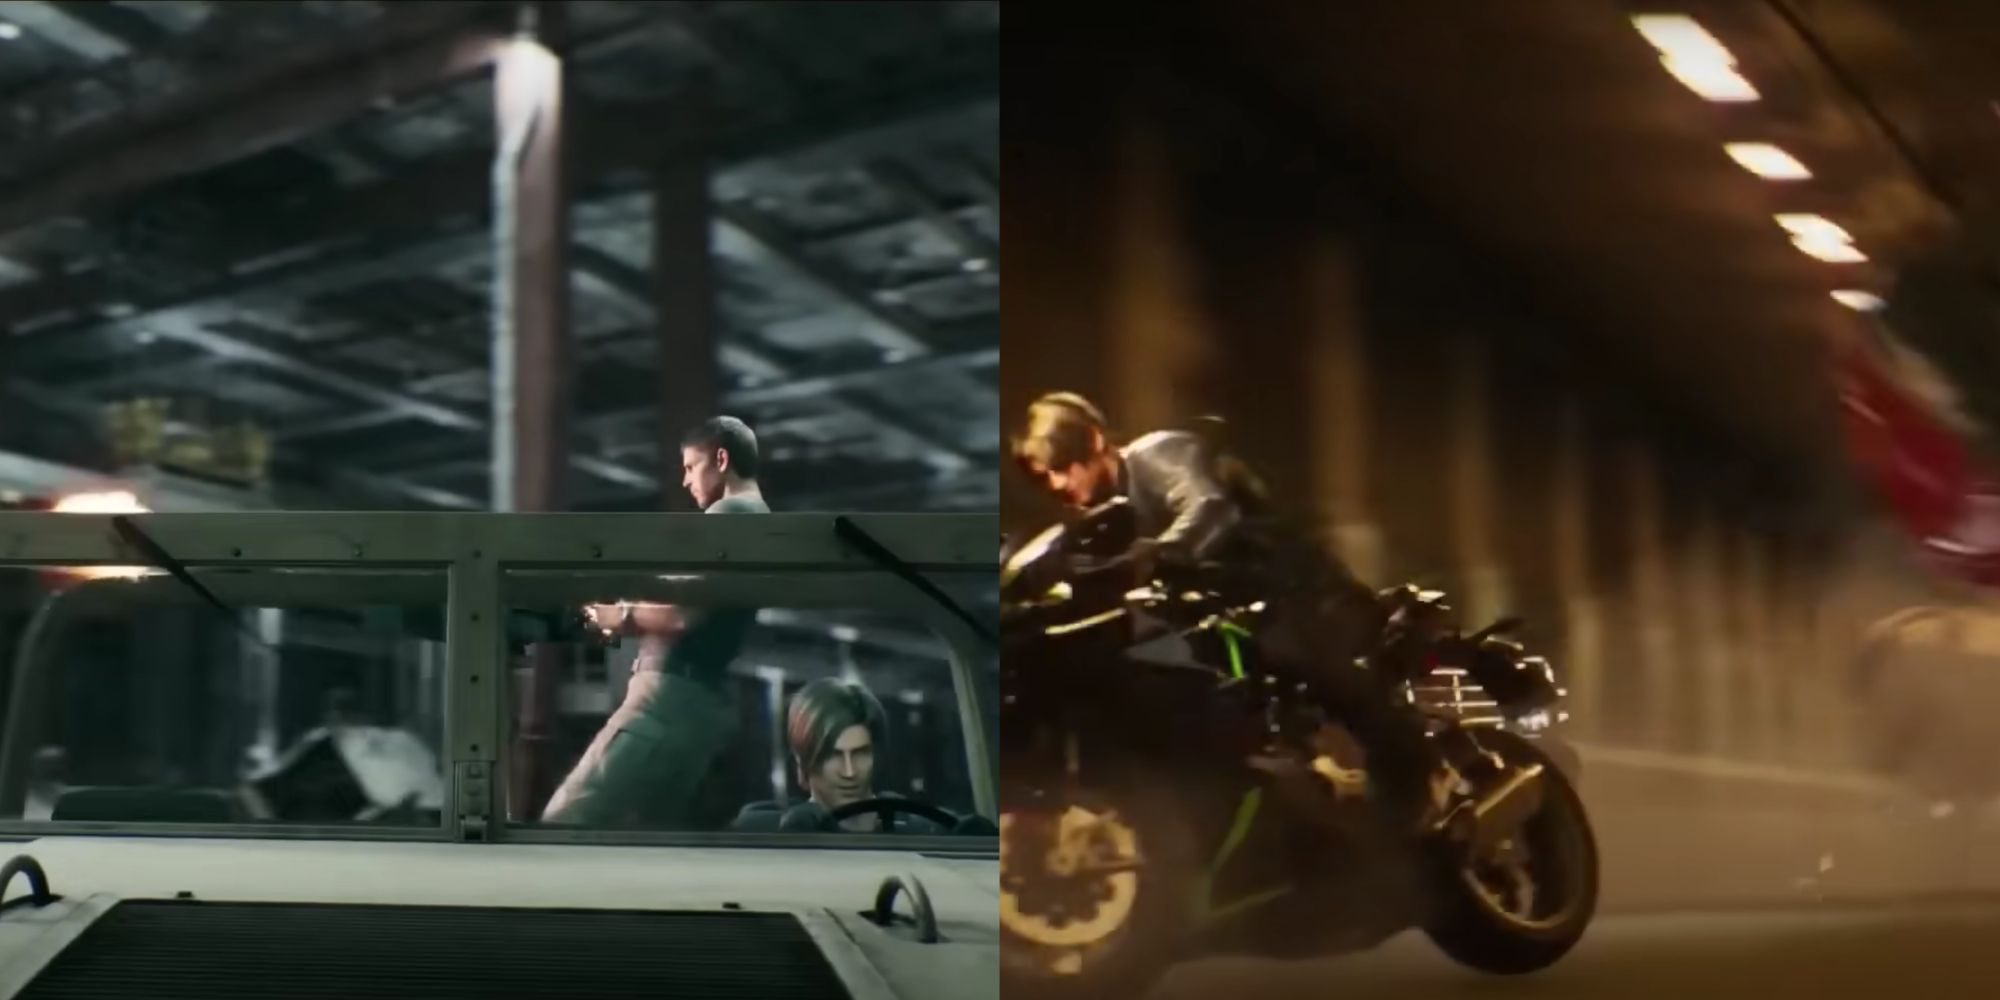 A split image of Leon driving a Humvee-type vehicle, Chris controlling a gun in the back, and Leon dodging a red car on a motorcycle in a tunnel.